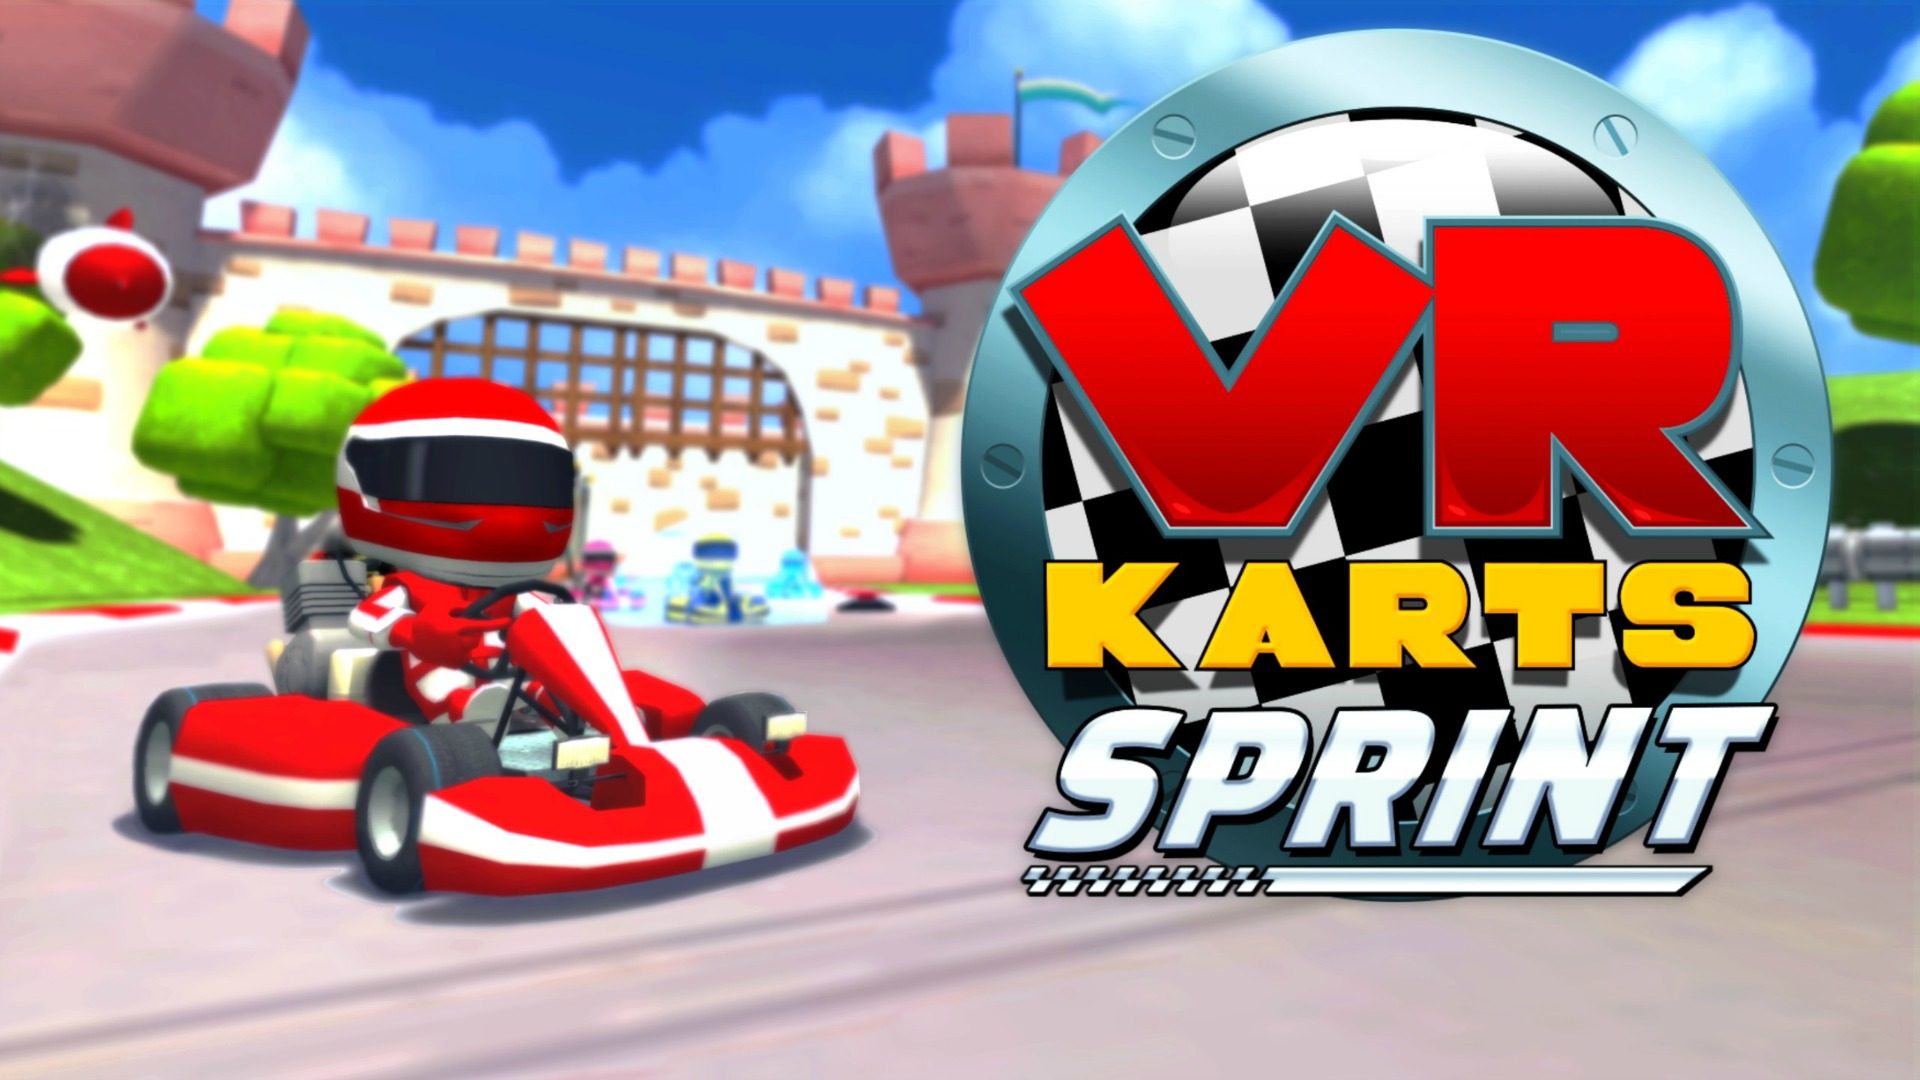 VR Sprint' Comes to VR with Mario Kart-Style Online Multiplayer – Road to